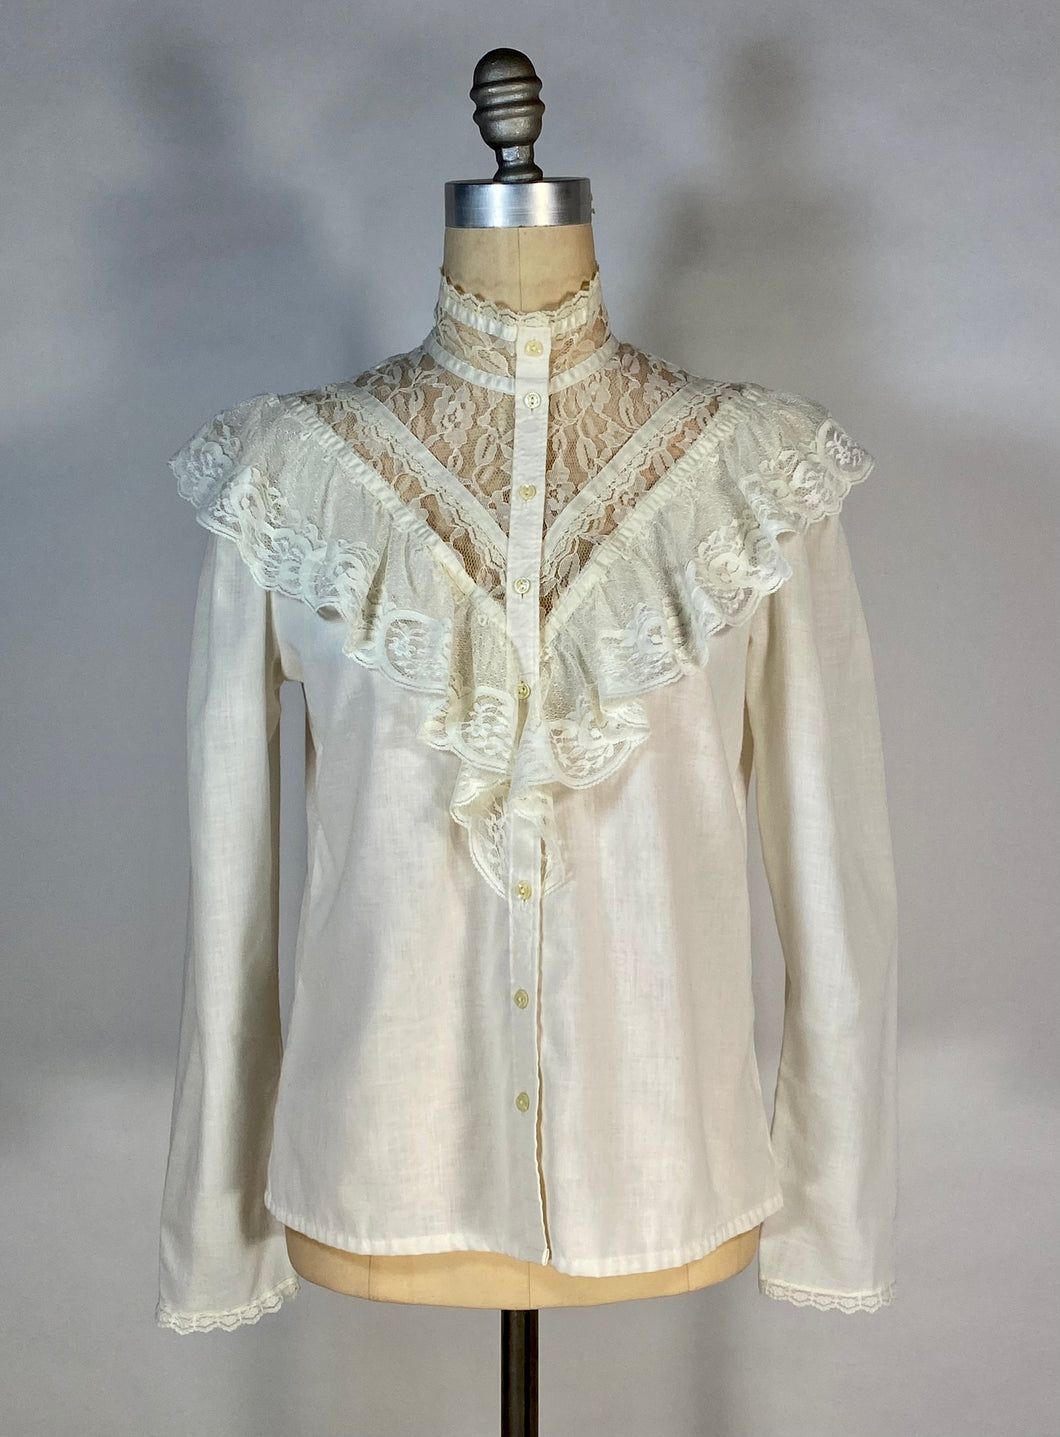 1970s-80's VICTORIAN lace neck Gunnies shirt by Jessica McClintock size 11